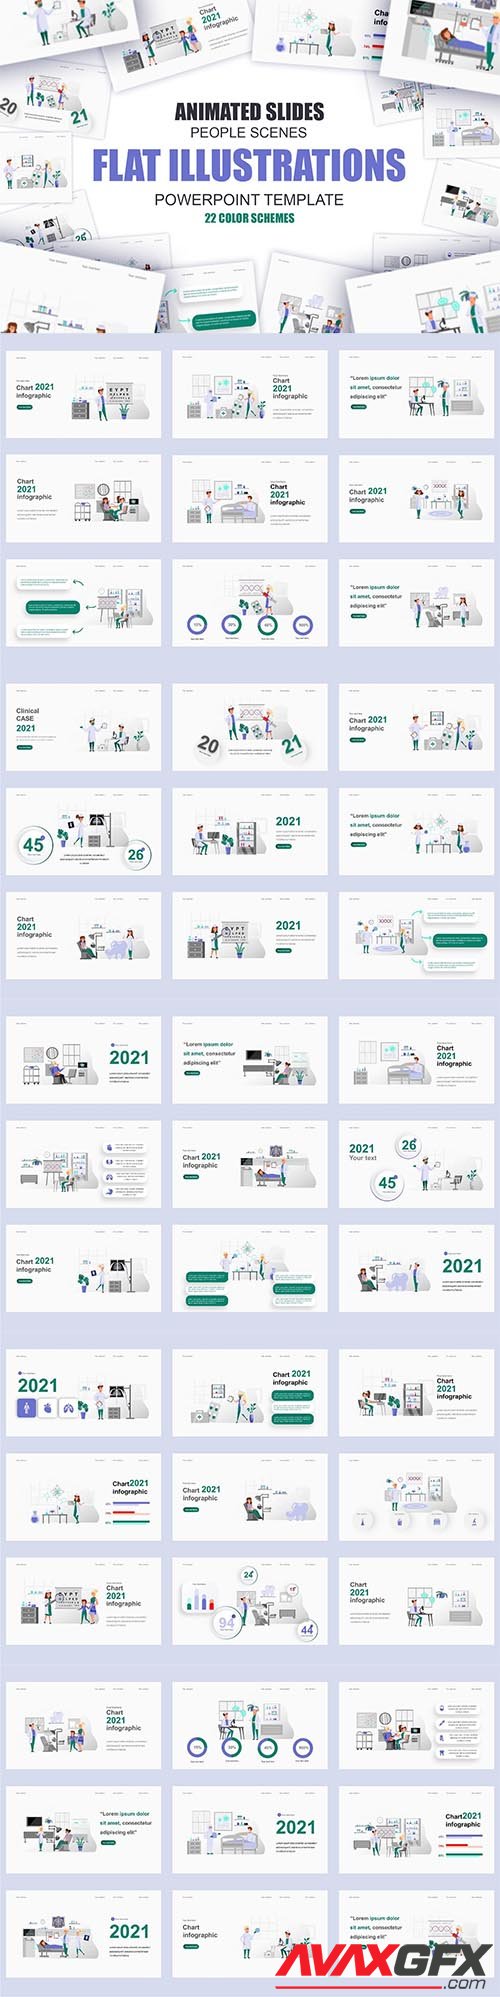 Medical Illustration Powerpoint Template